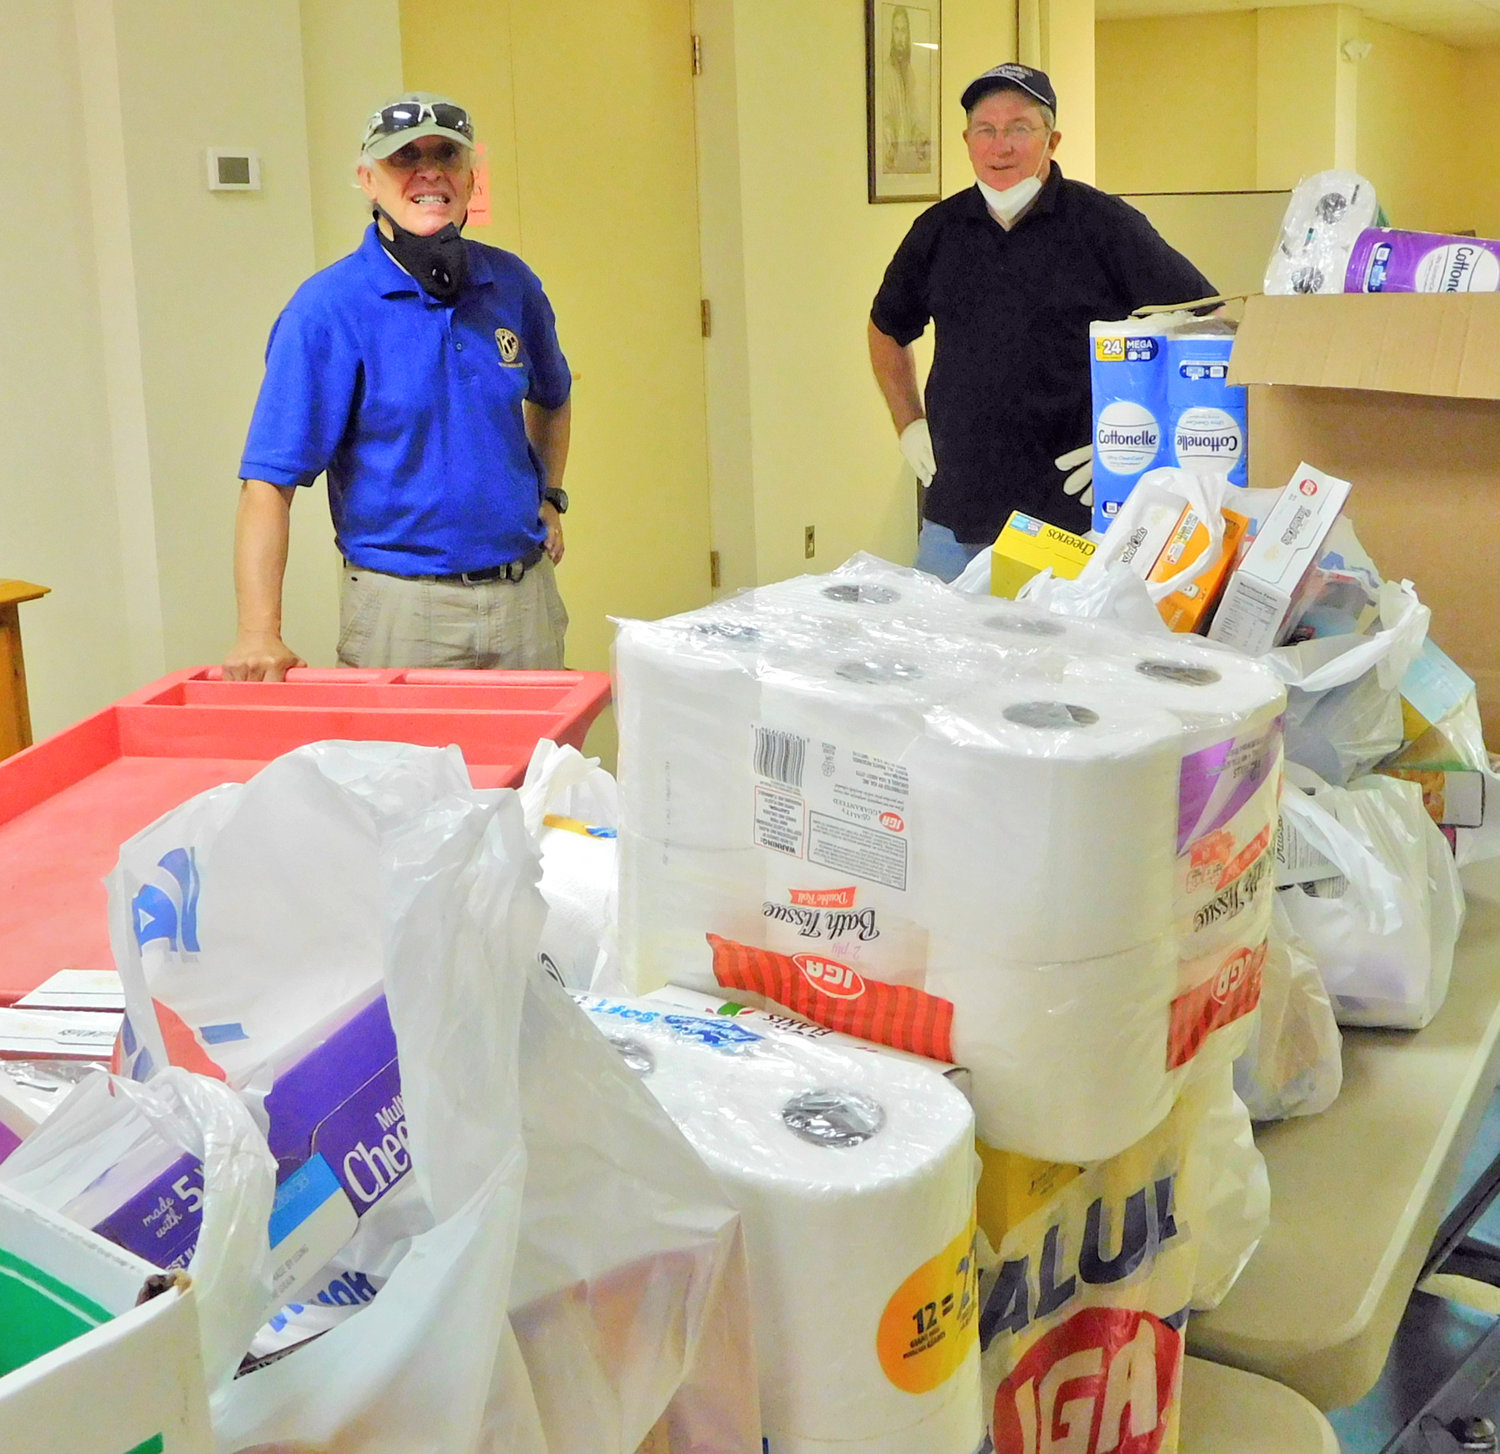 VOLUNTEER EFFORT — A pair of volunteer workers sort through food, paper goods and other supplies that were distributed to individuals and families in need in the Oneida area by the Karing Kitchen in this July 2020 file photo. The organization, which helps feed those in need in the area, is taking a one-week breather and will return to assist the hungry in the region.